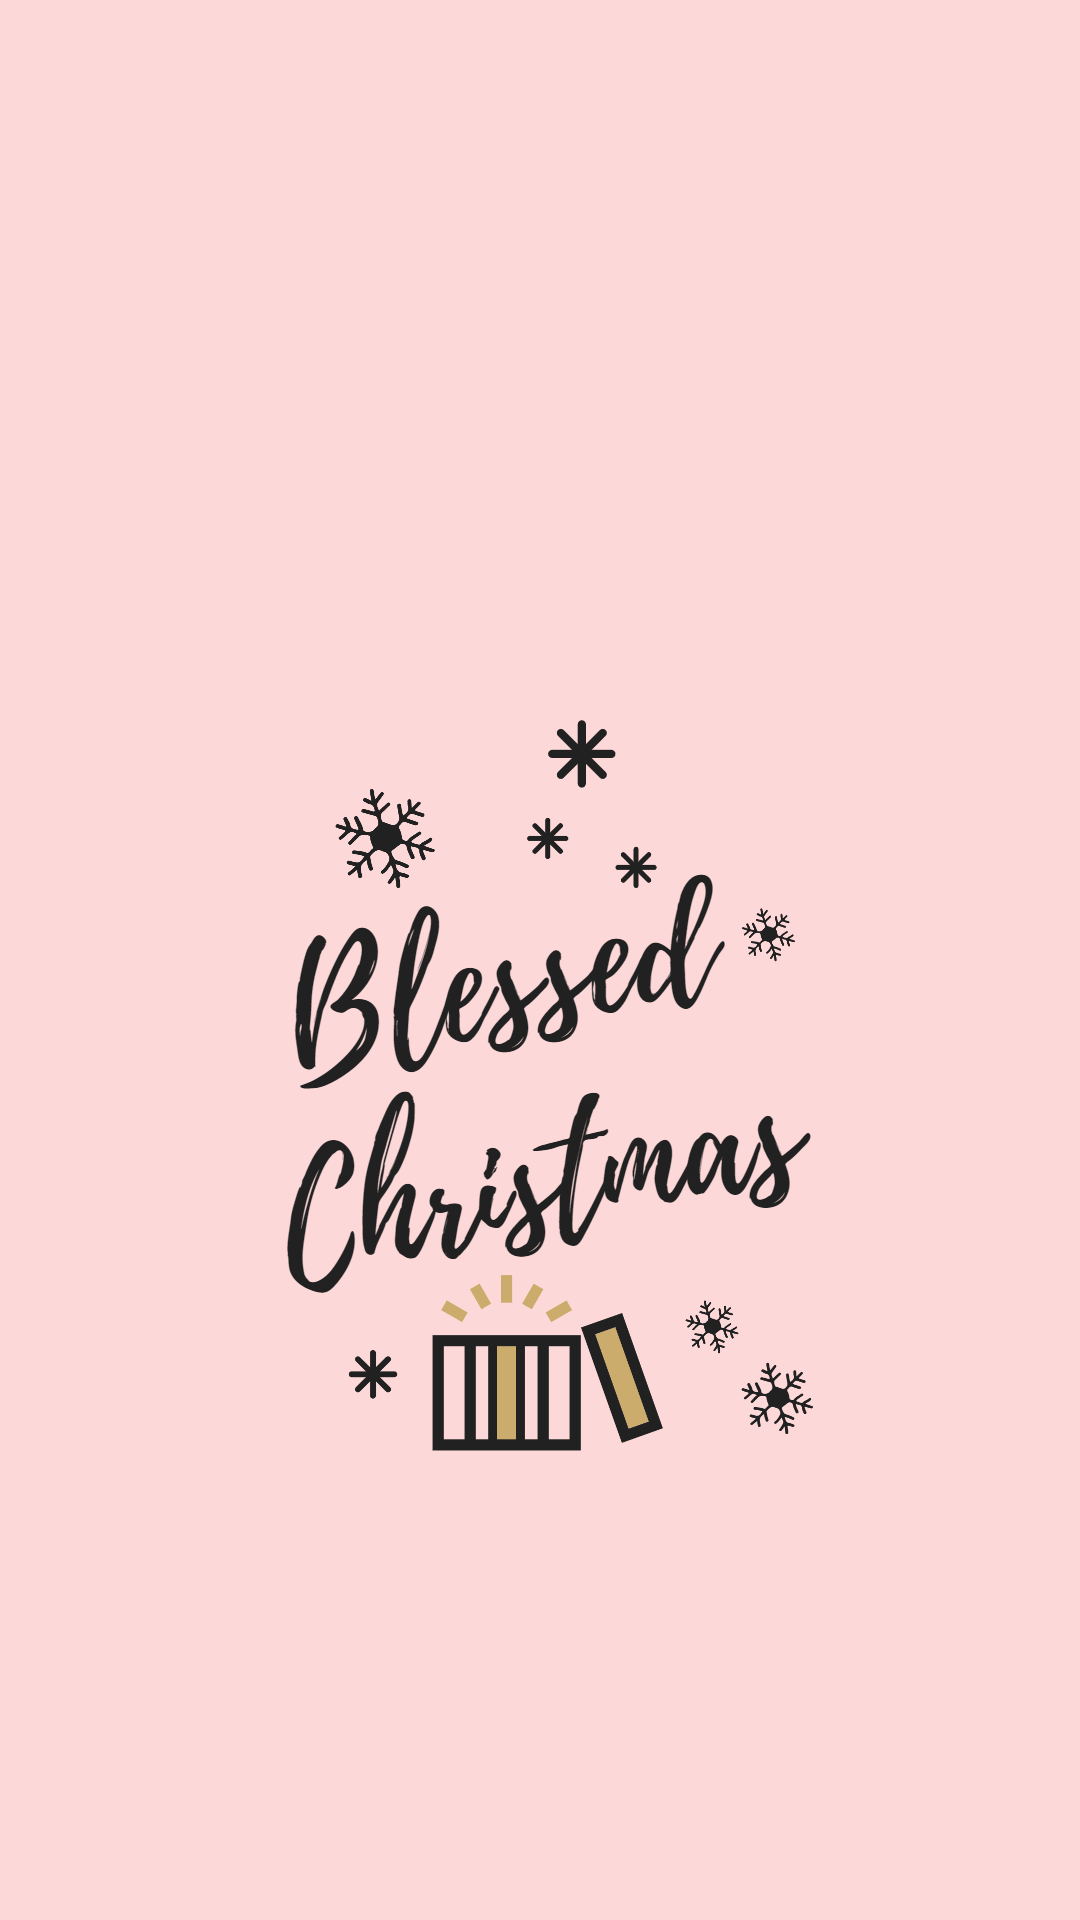 Christmas phone background with the words blessed Christmas - Christmas iPhone, cute Christmas